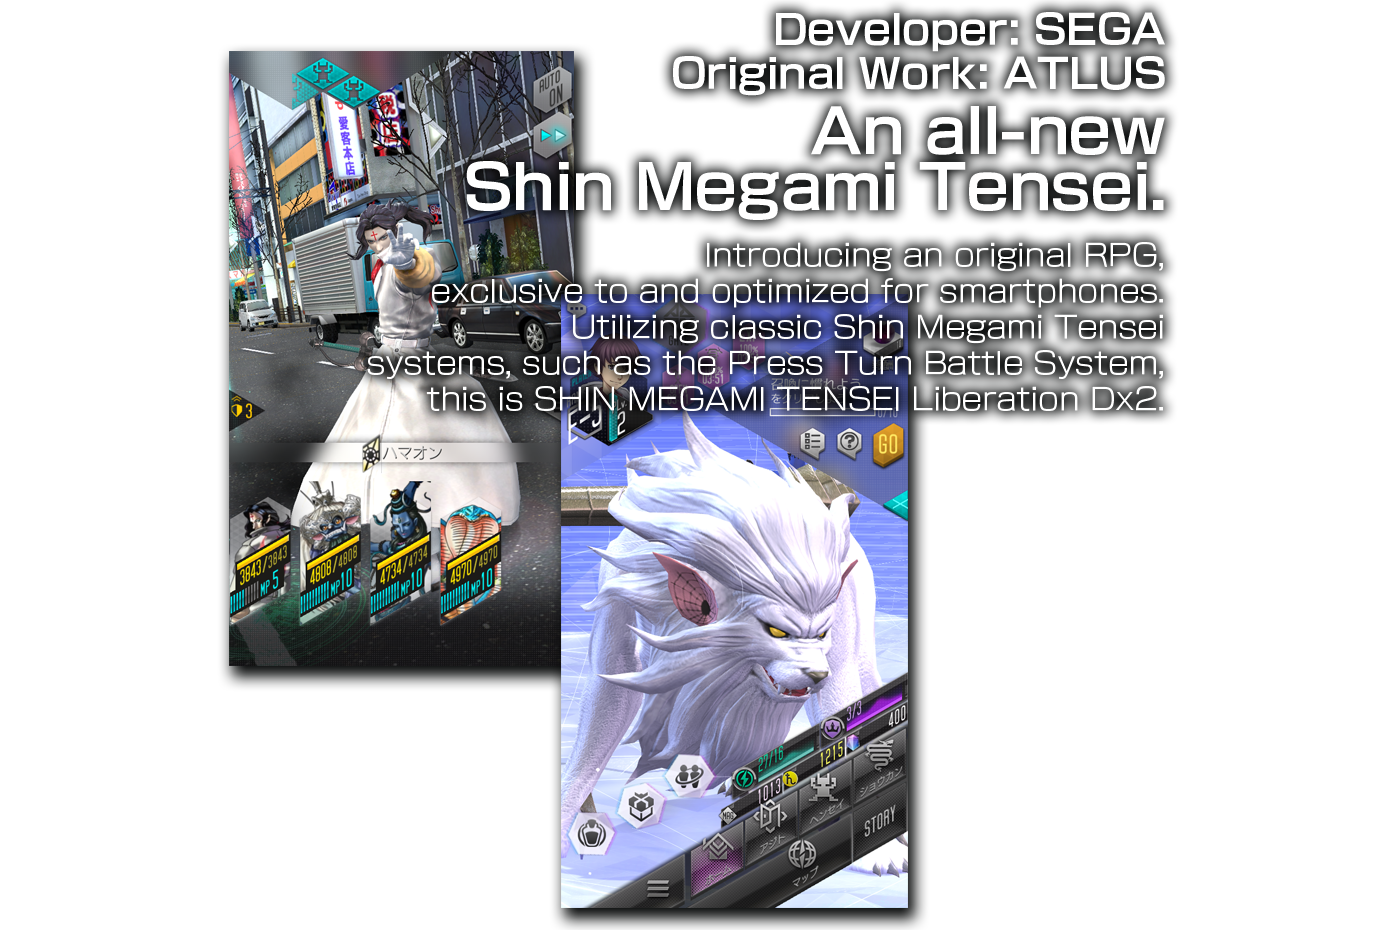 Developer: SEGA Original Work: ATLUS An all-new Shin Megami Tensei.Introducing an original RPG, exclusive to and optimized for smartphones. Utilizing classic Shin Megami Tensei systems, such as the Press Turn Battle System, this is SHIN MEGAMI TENSEI Liberation Dx2.